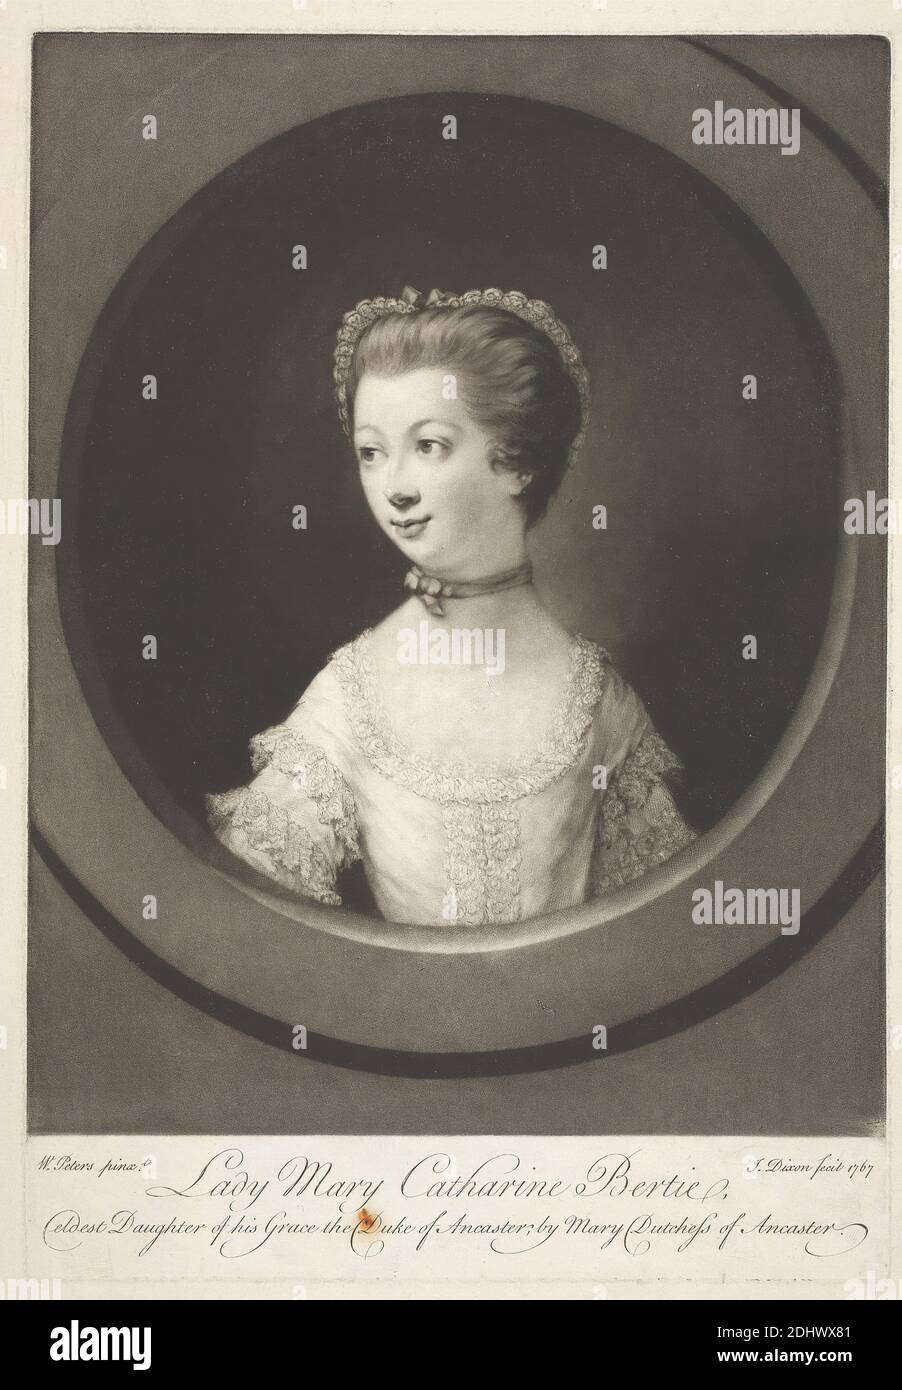 Lady Mary Catharine Bertie, Print made by John Dixon, ca. 1740–1811, Irish, after Matthew William Peters, 1742–1814, British, 1767, Mezzotint on moderately thick, slightly textured, cream laid paper, Sheet: 16 9/16 x 12 1/16 inches (42 x 30.7 cm), Plate: 13 1/8 x 9 inches (33.3 x 22.8 cm), and Image: 11 9/16 x 9 inches (29.3 x 22.8 cm), choker, daughter, gaze, hair, lace, lady, portrait, posing, ribbons, ruff, smiling, woman Stock Photo